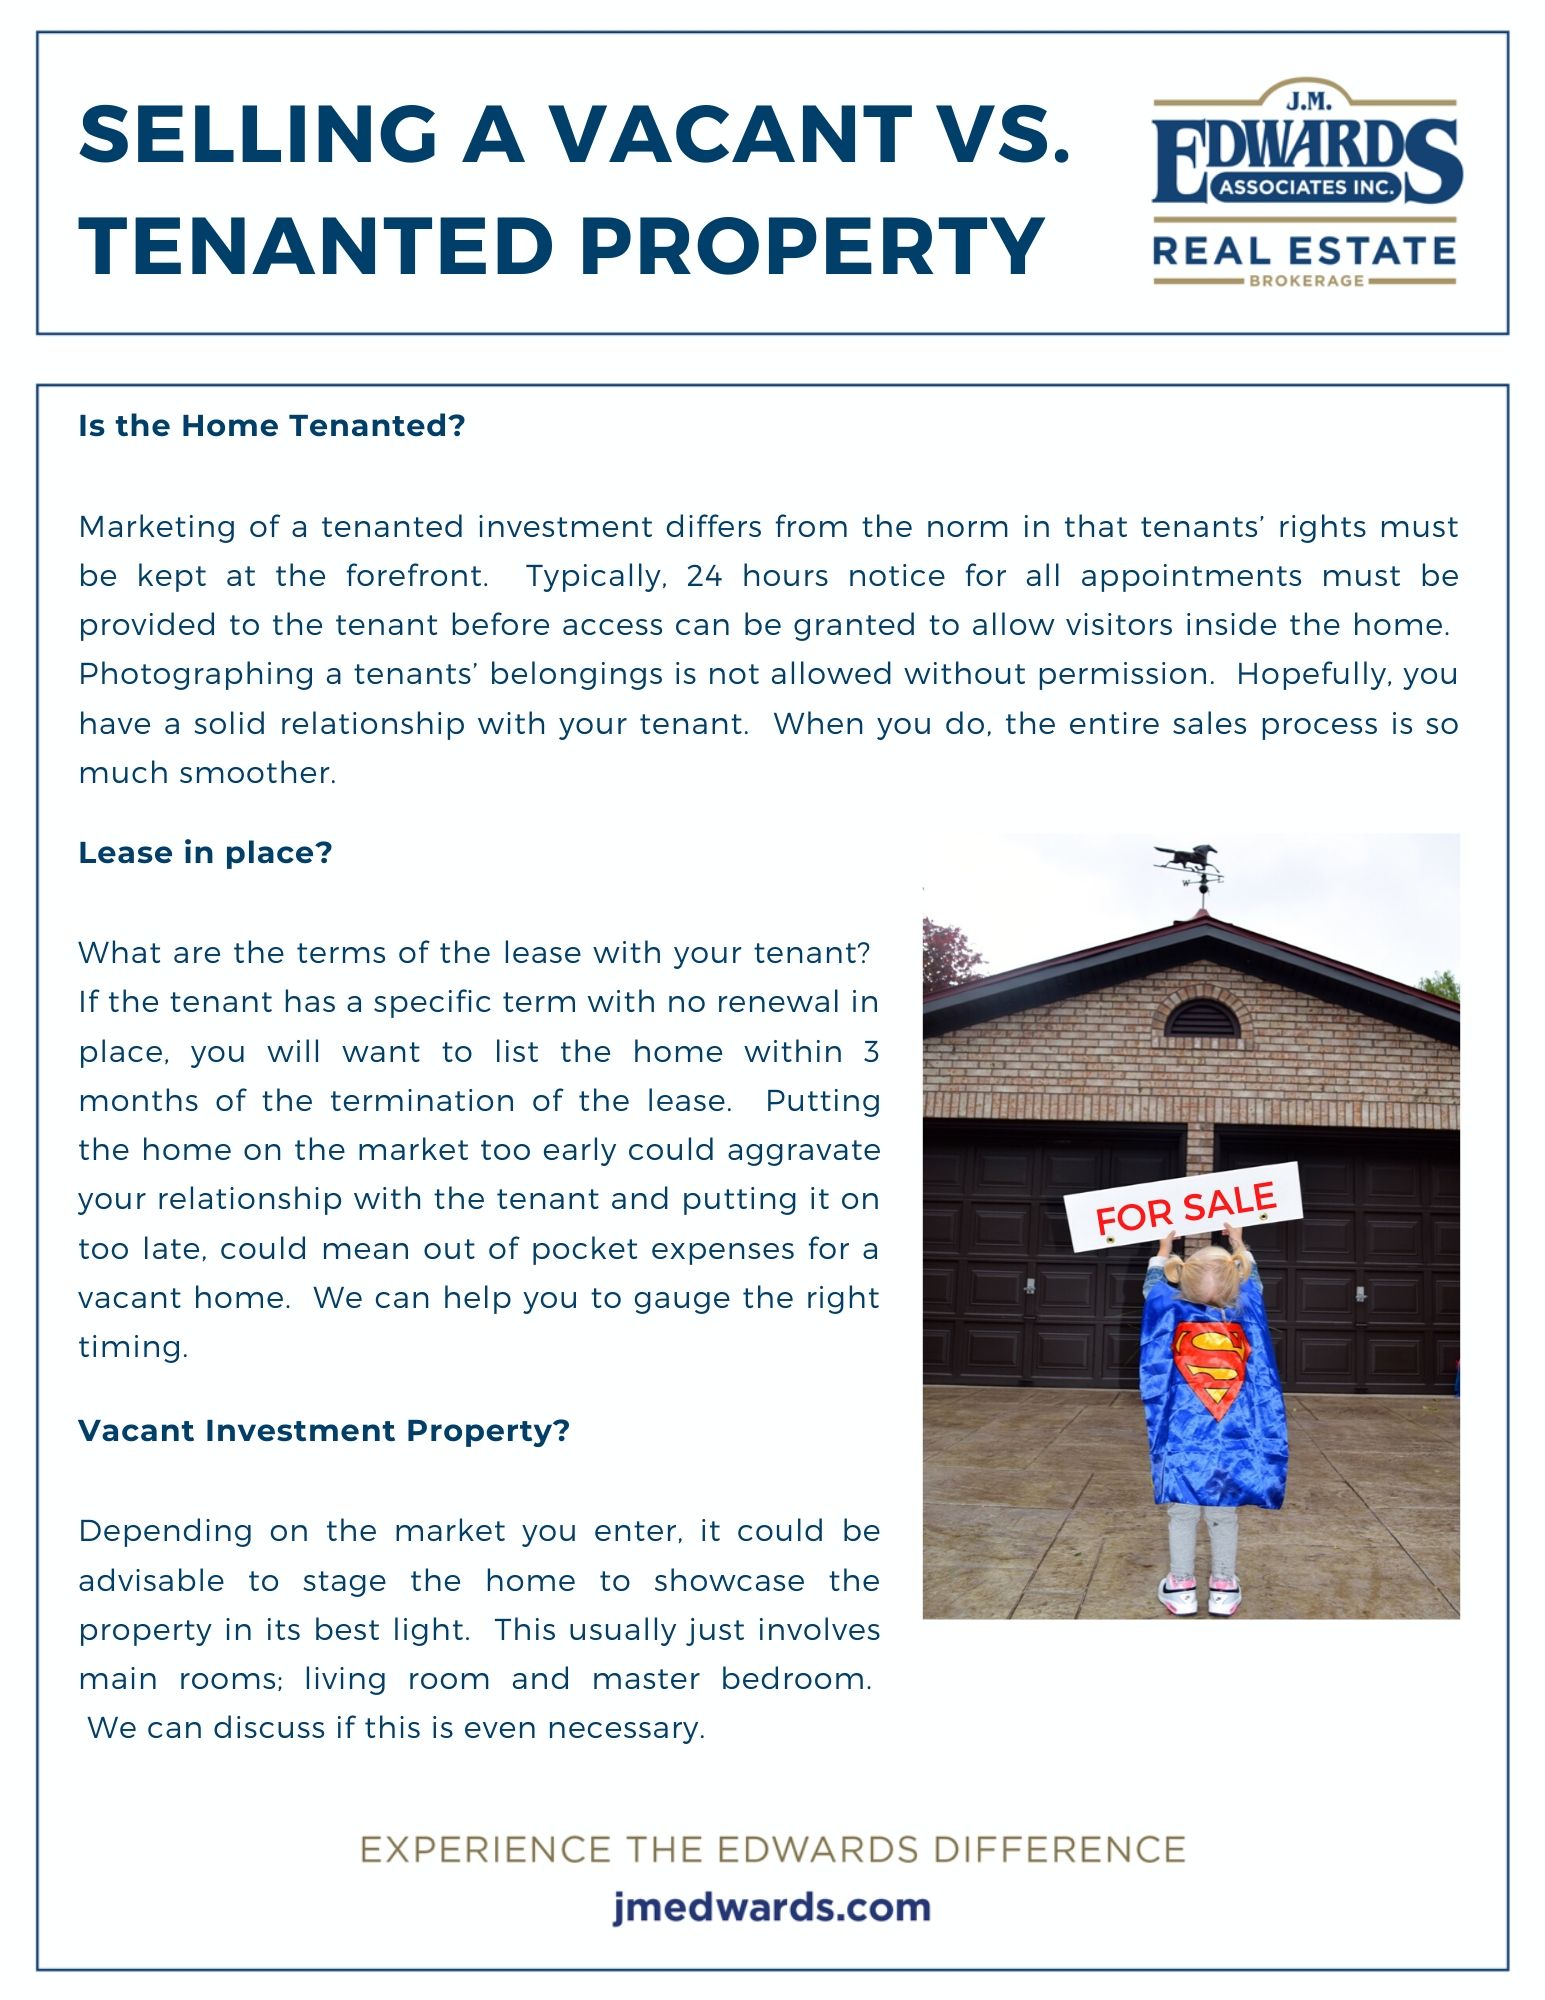 SUBMIT: IS01 - Selling Vacant vs Tenanted Property.jpg